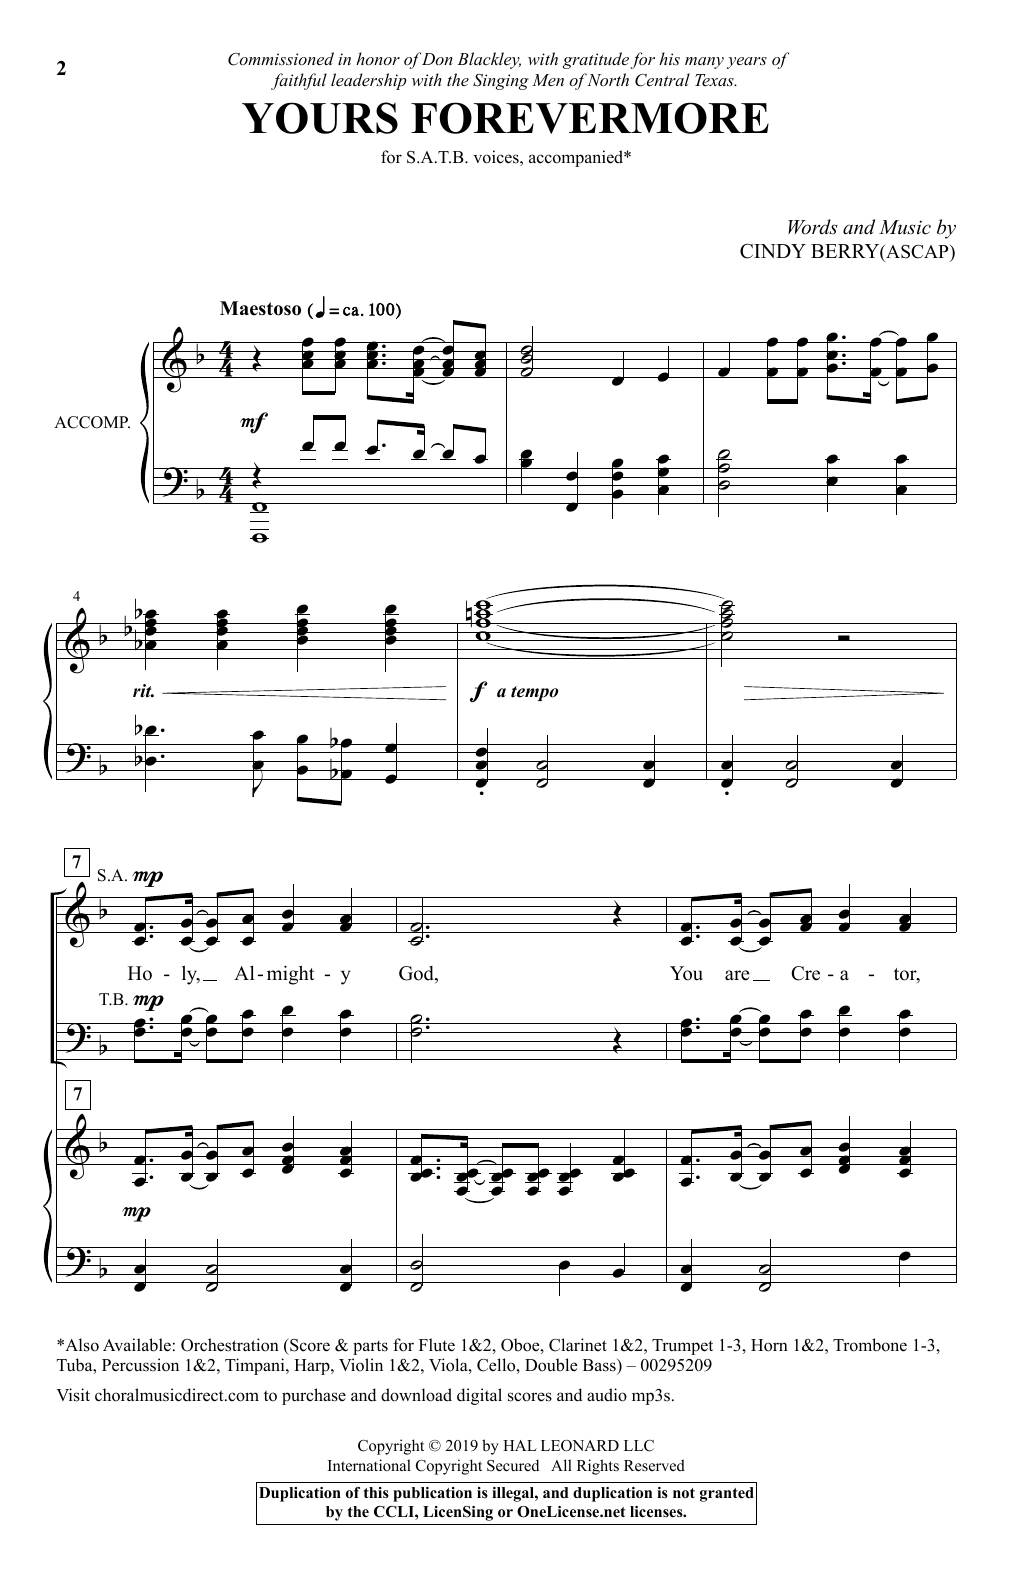 Download Cindy Berry Yours Forevermore Sheet Music